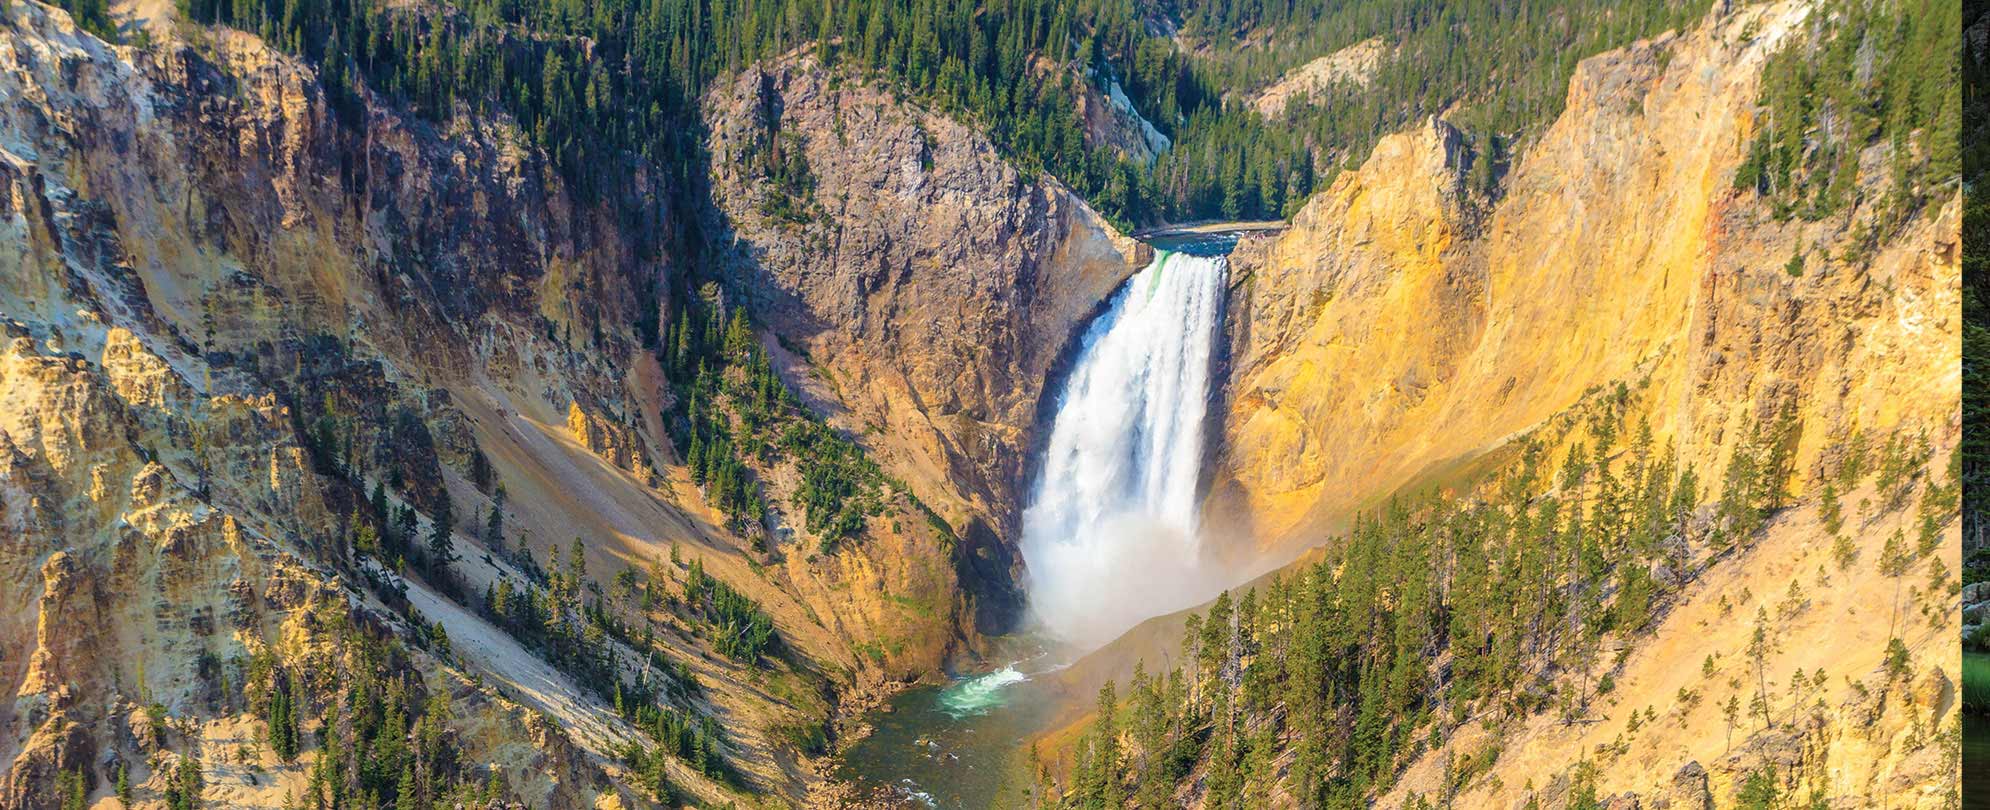 The 308-foot lower waterfall thunders down into the Yellowstone River at Yellowstone National Park in Wyoming